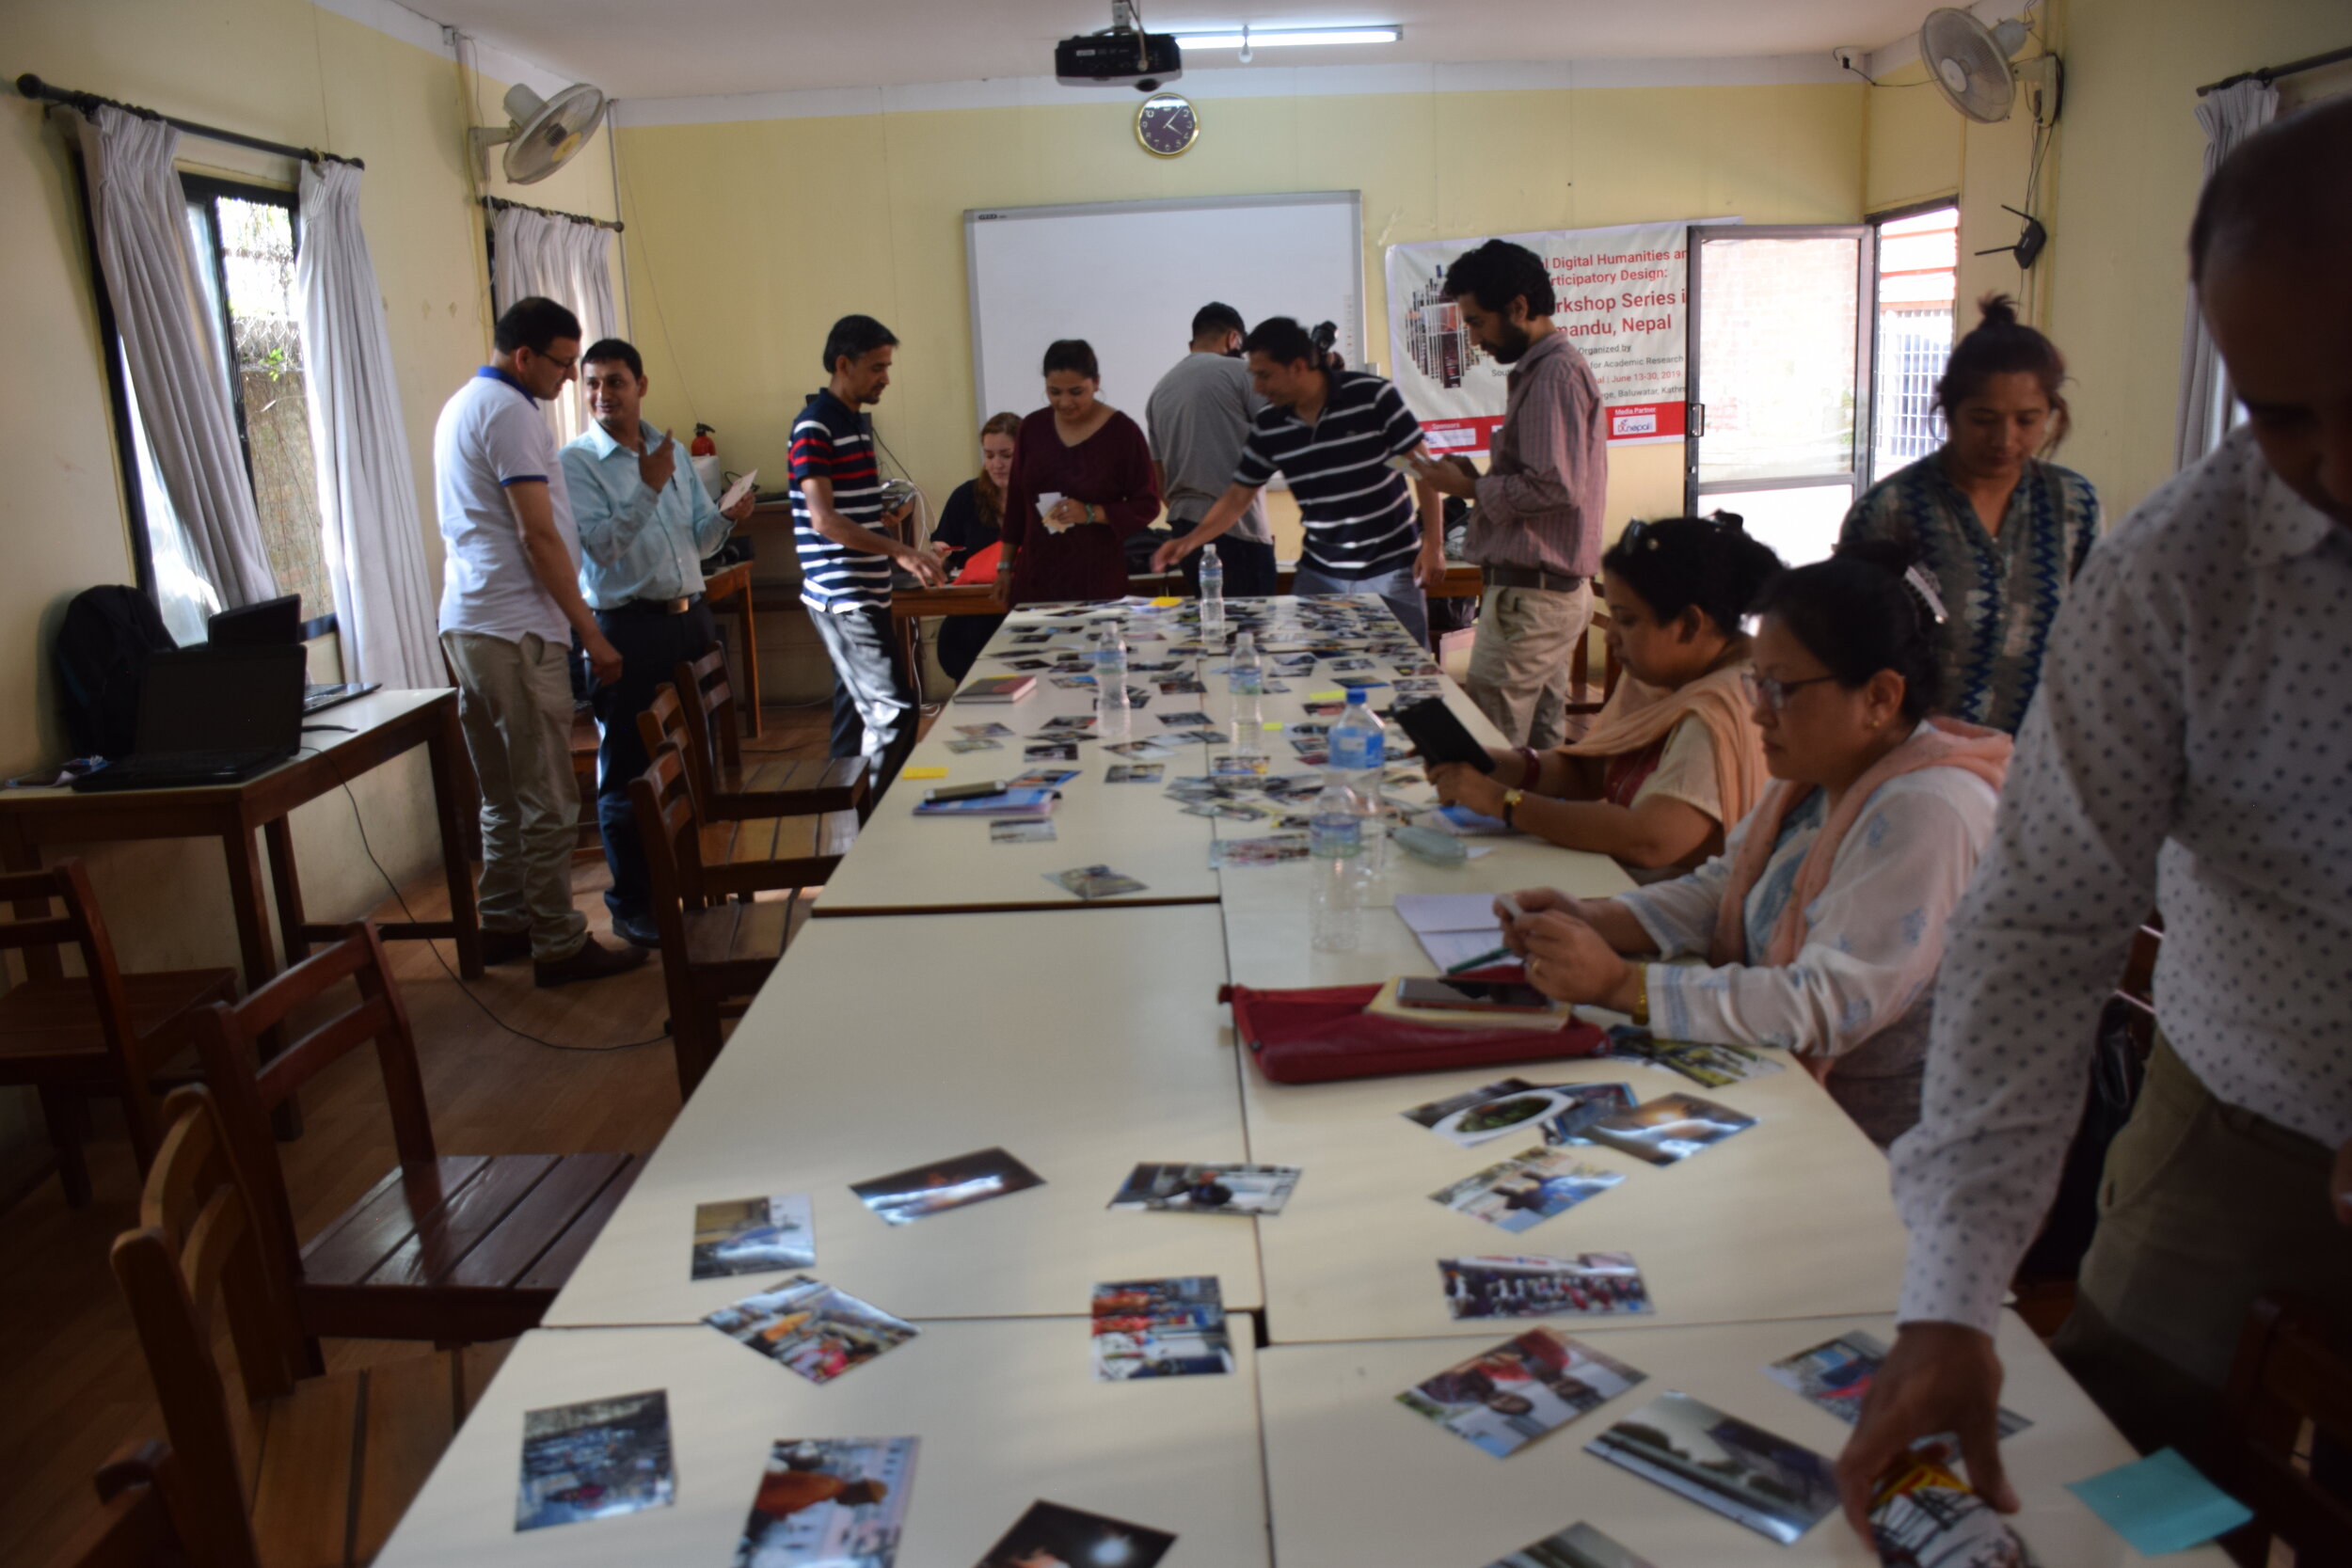 A group of students arranges pictures around a long table in a classroom.